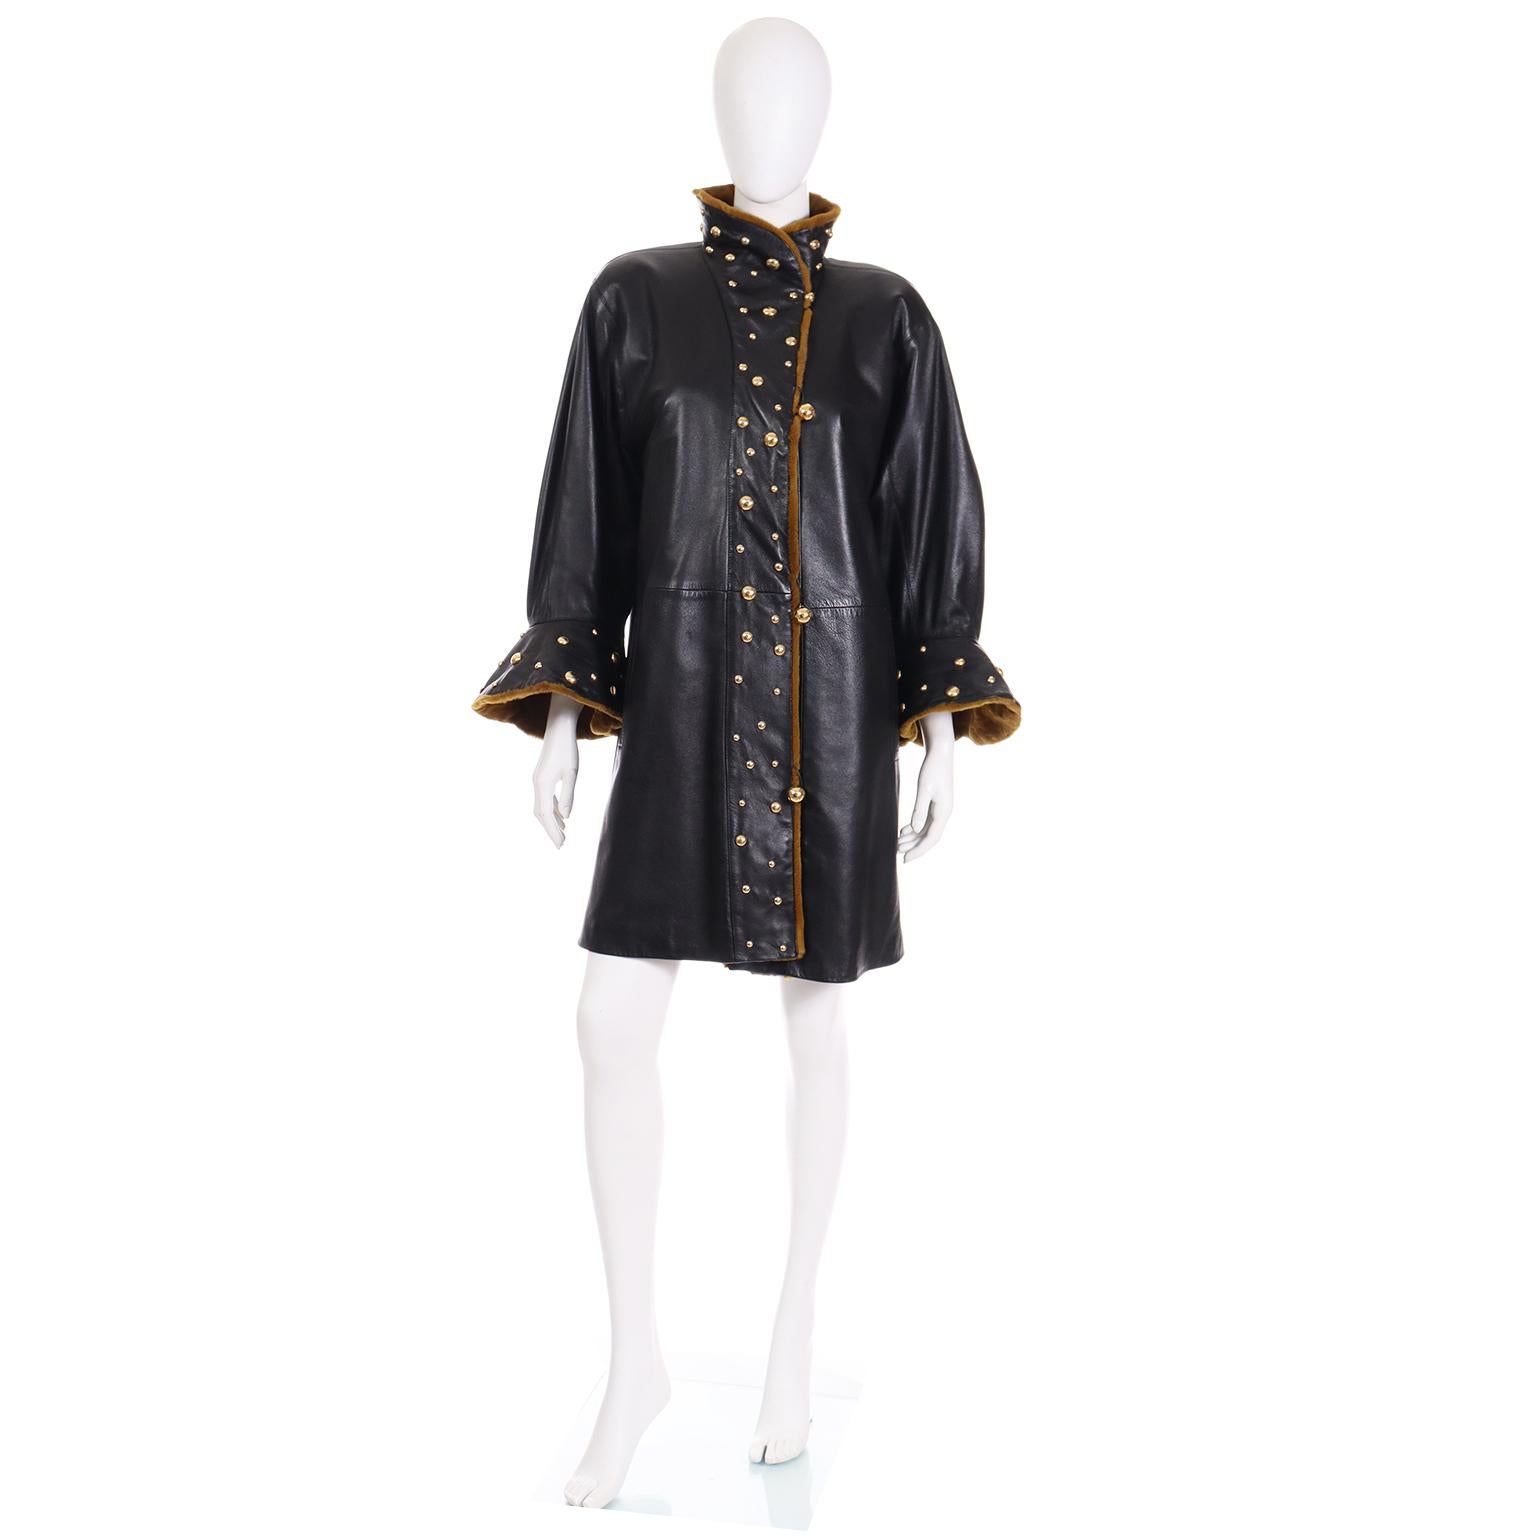 This is a sensational 1980's vintage black leather Yves Saint Laurent Fourrures Coat with sheared mink lining and trim. This rare vintage coat has dramatic gold studs down the front, on the collar and on the flared cuffs.

This stunning YSL coat is